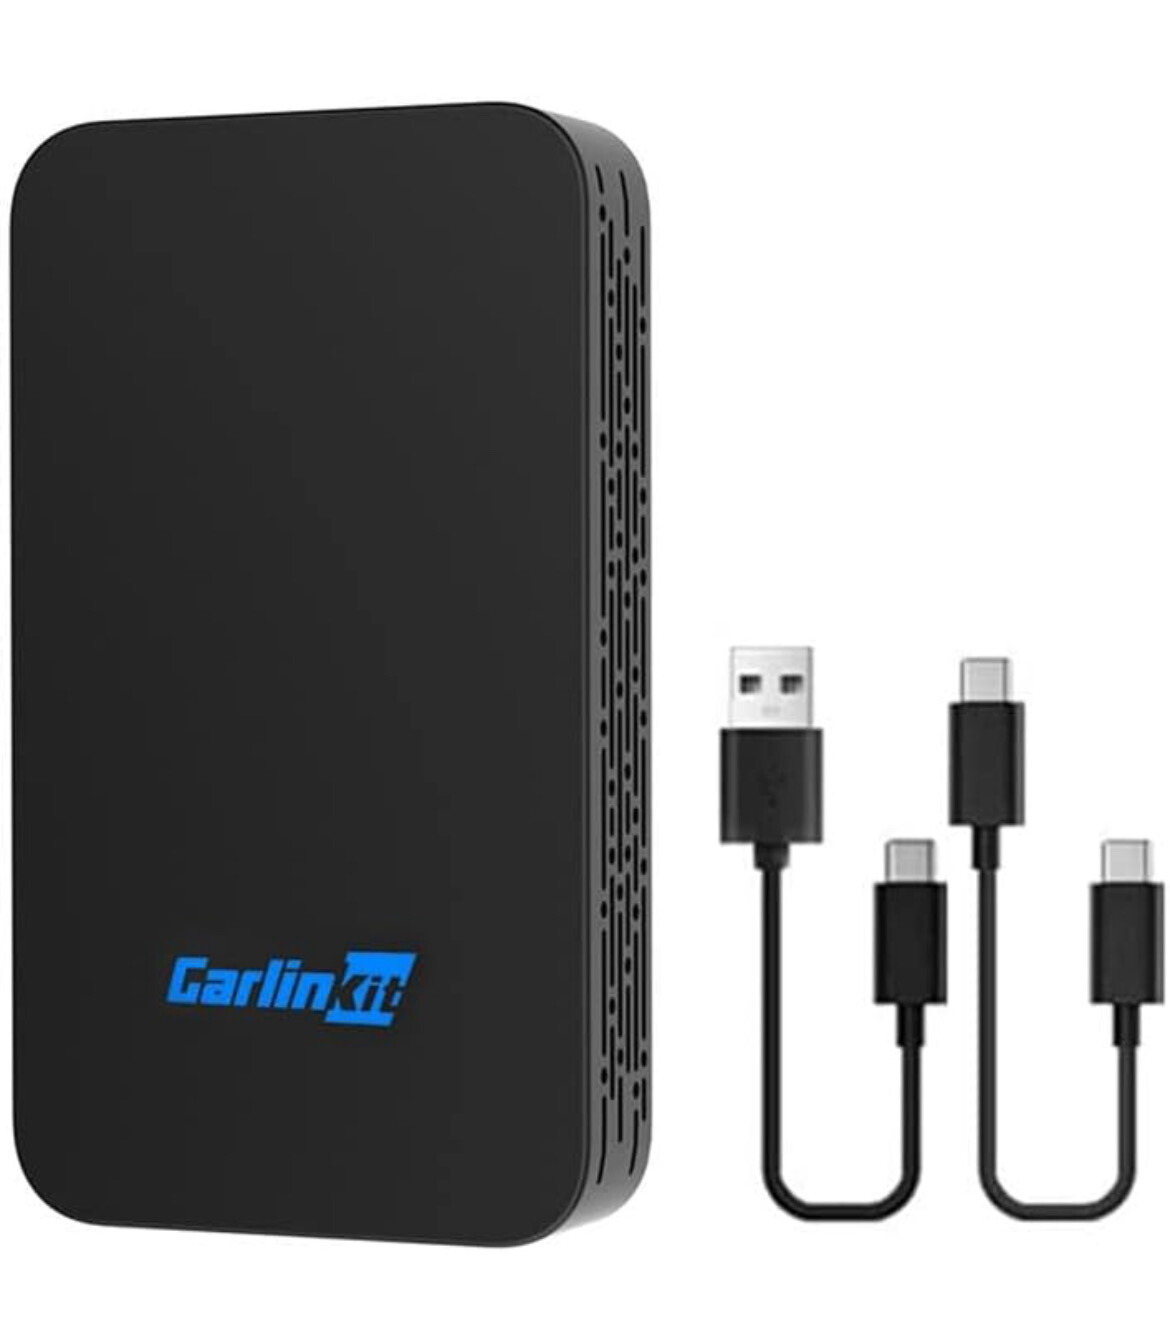 CarlinKit Wireless Apple CarPlay / Android Auto Adapter - 5.0 CampingRandy Recommended